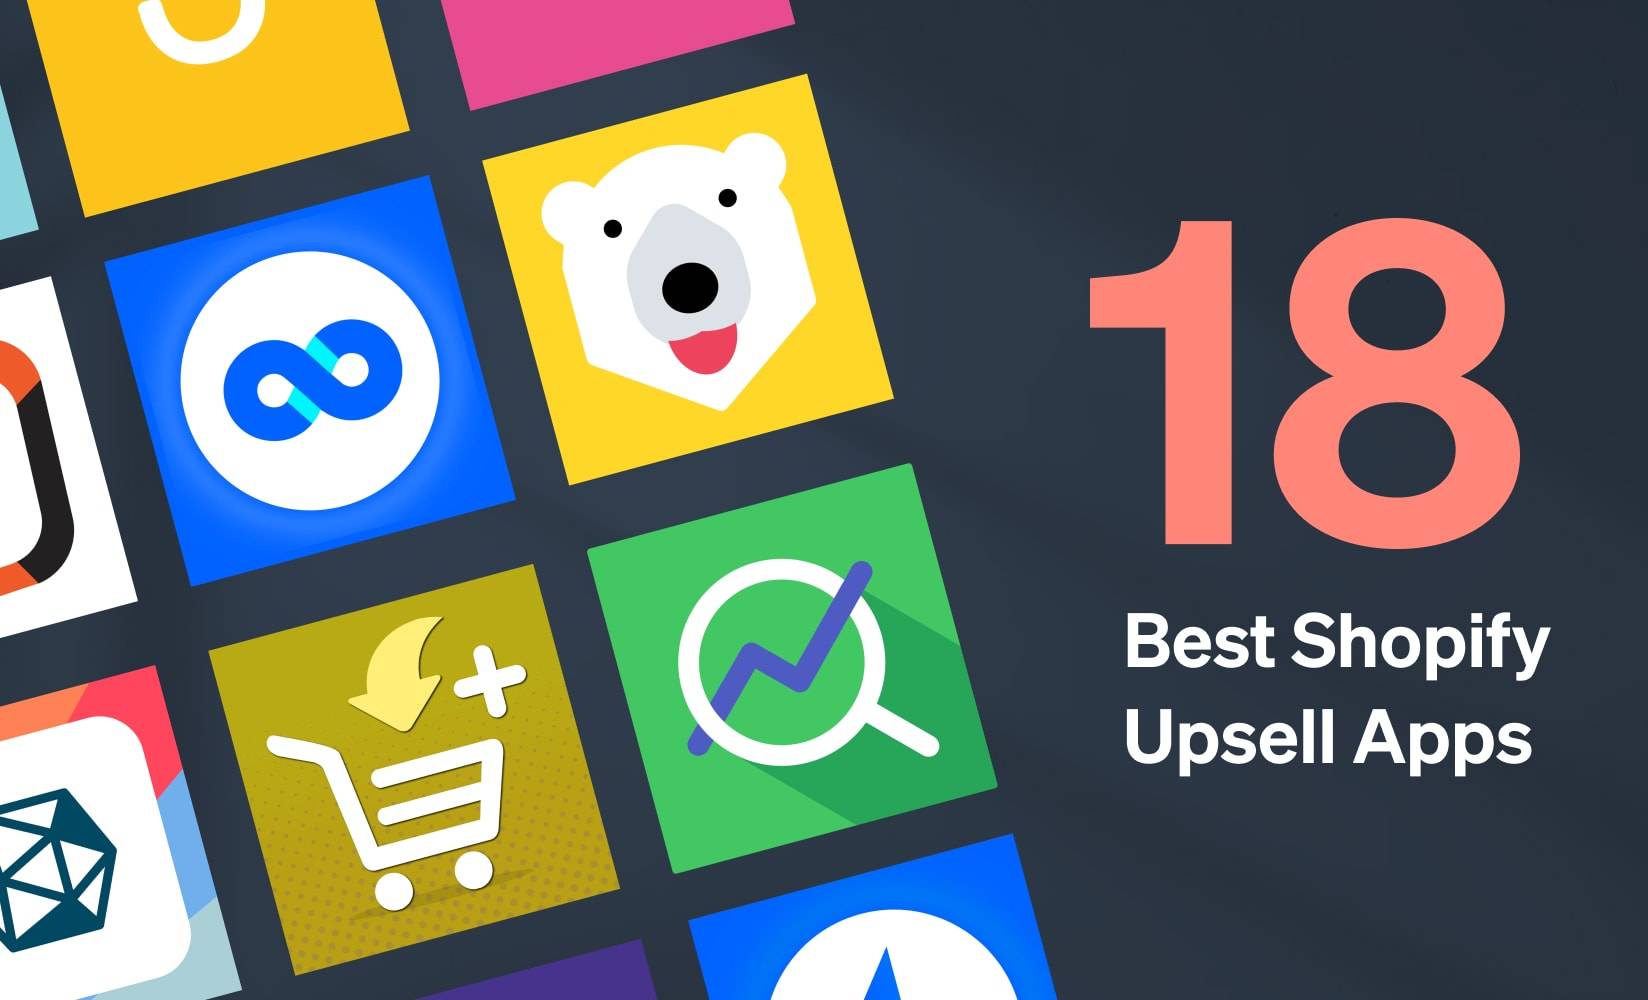 18 best shopify upsell apps shopify upsell apps